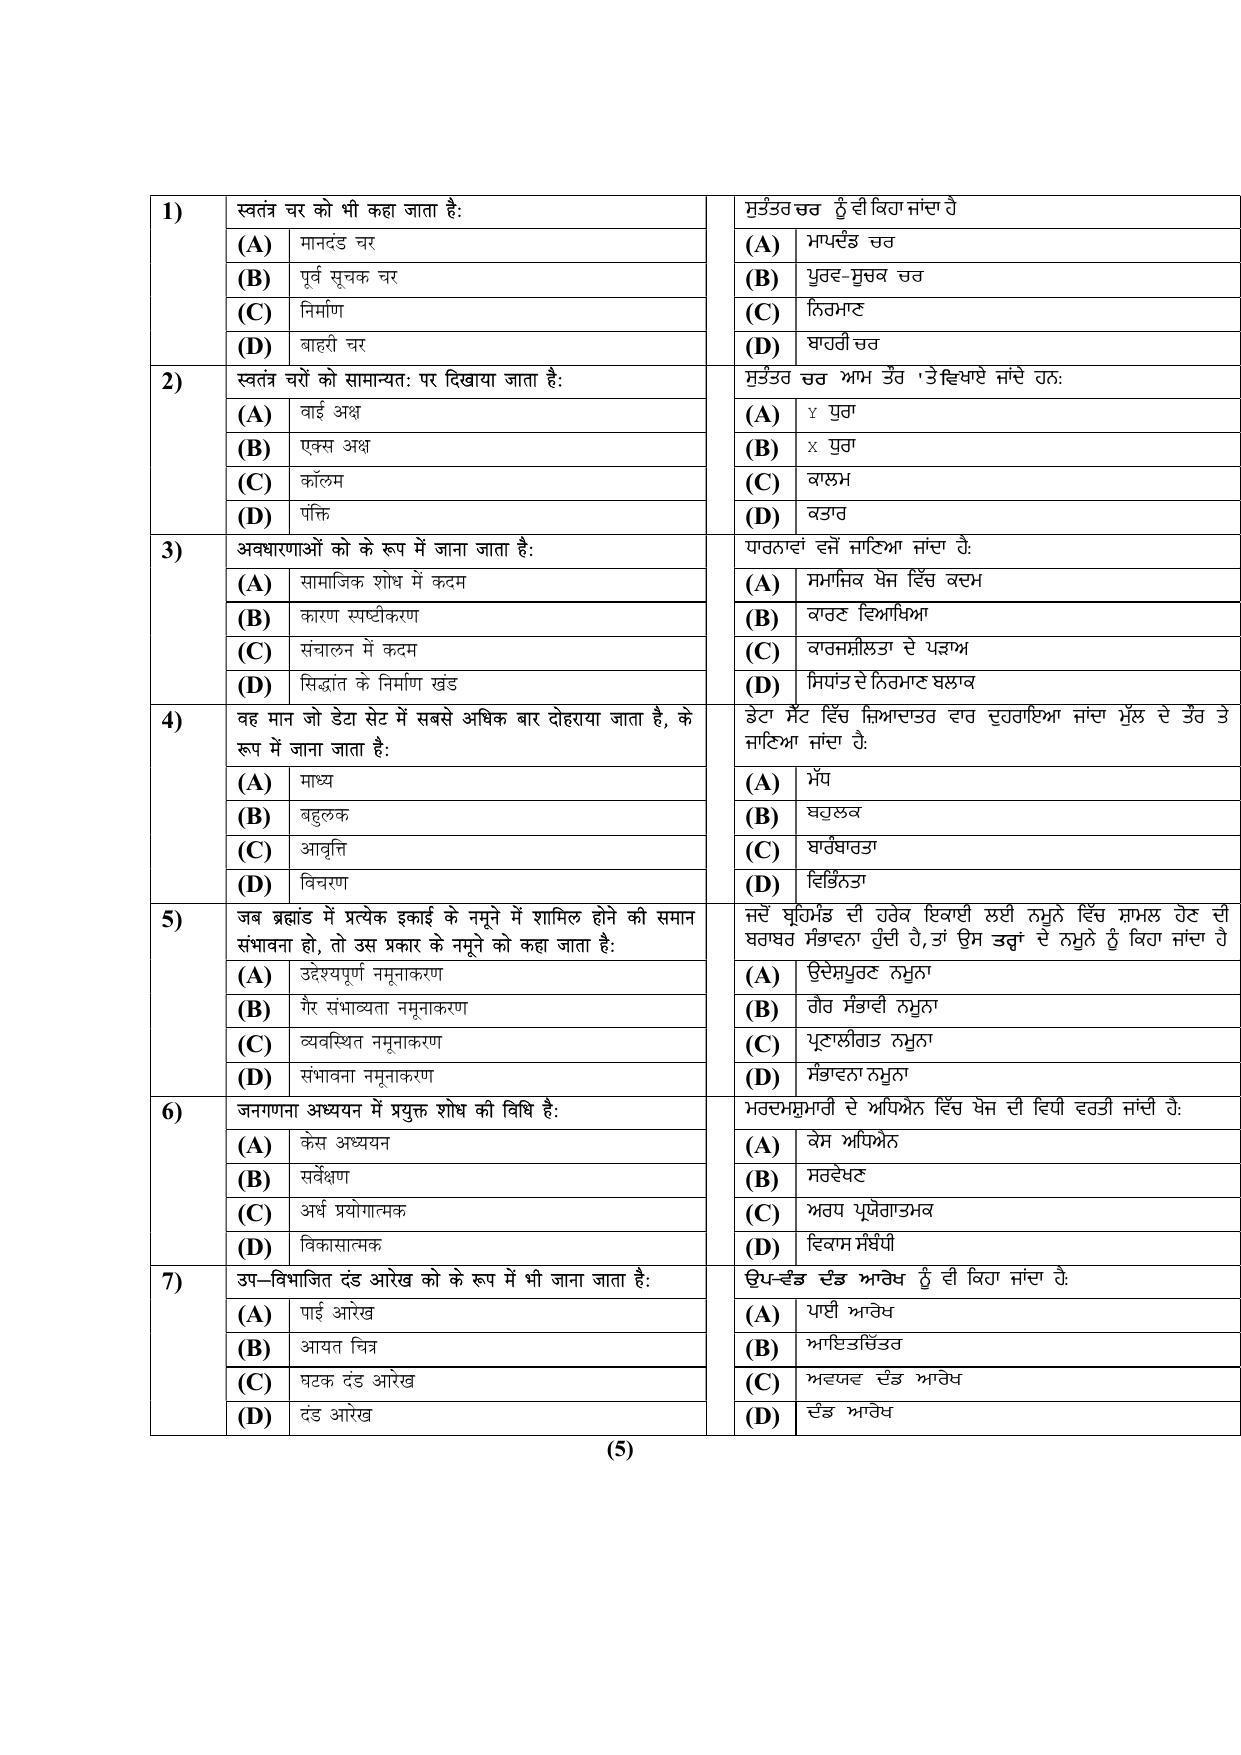 PU MPET Ancient Indian History & Archeology 2022 Question Papers - Page 62